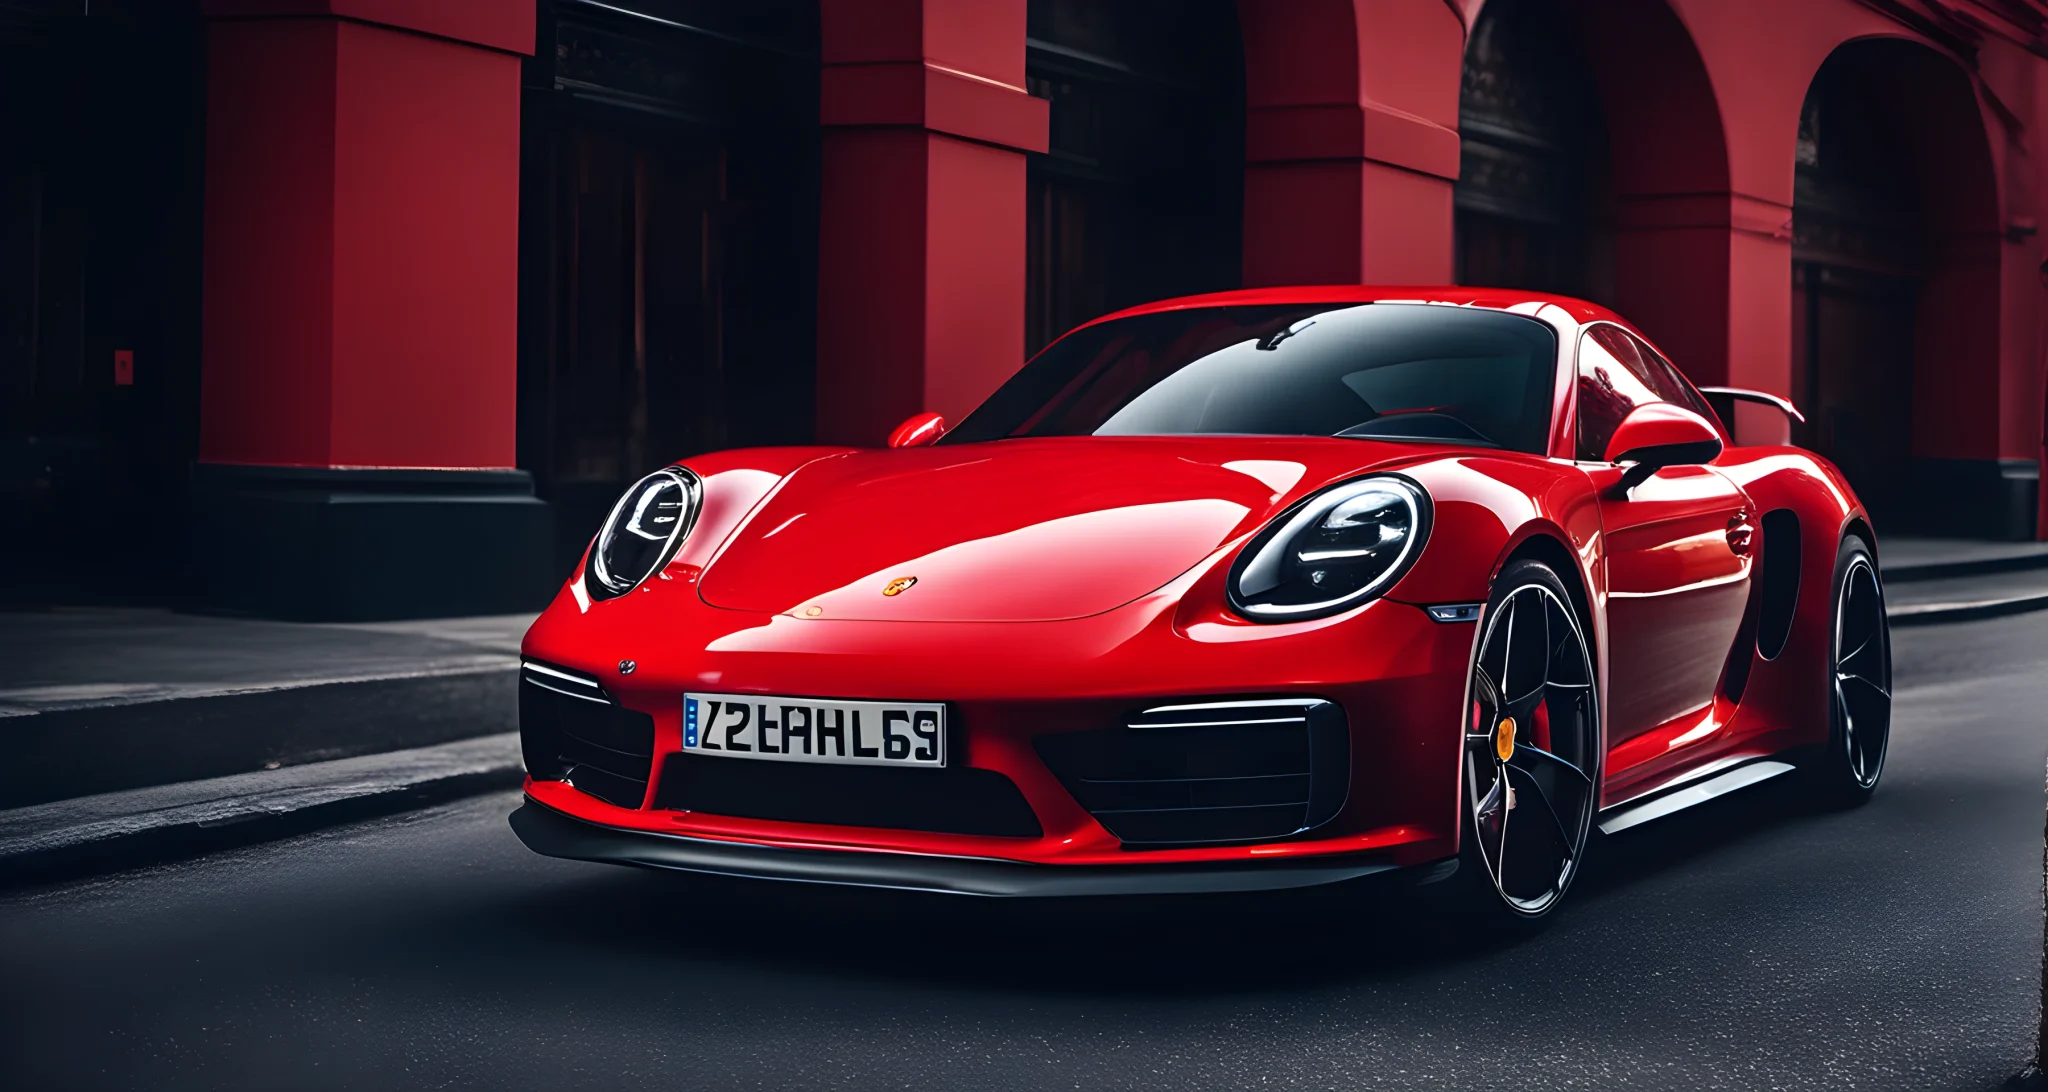 The image shows a sleek and powerful Porsche sports car in a stunning shade of red, with its iconic logo prominently displayed on the front.